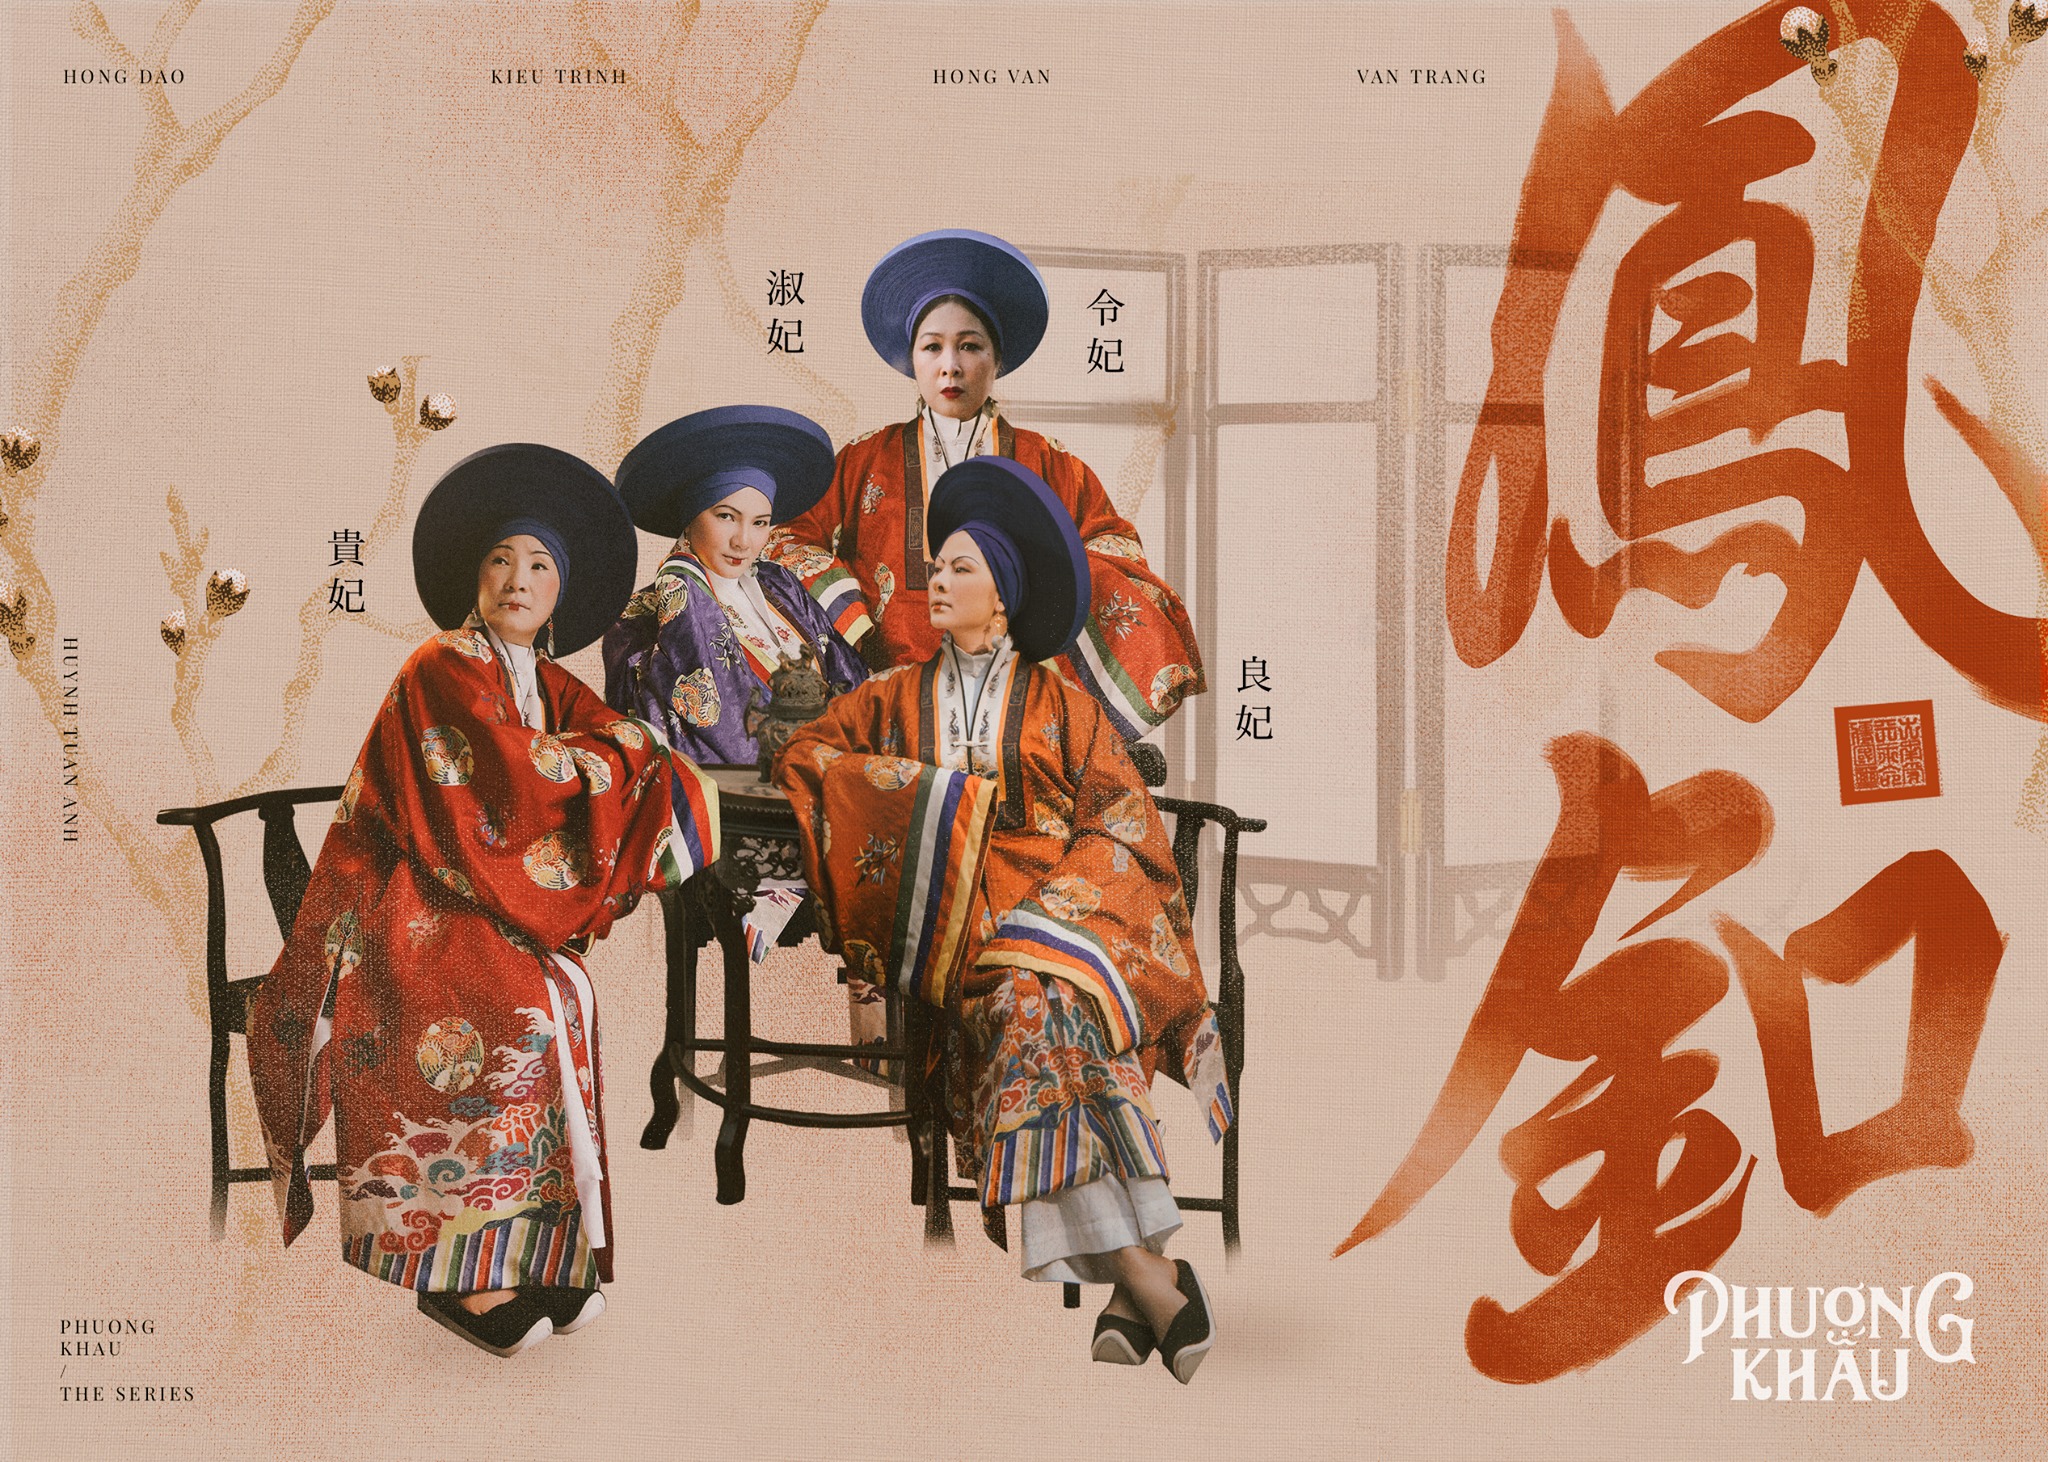 Vietnam’s first palace drama to air on YouTube in 2020